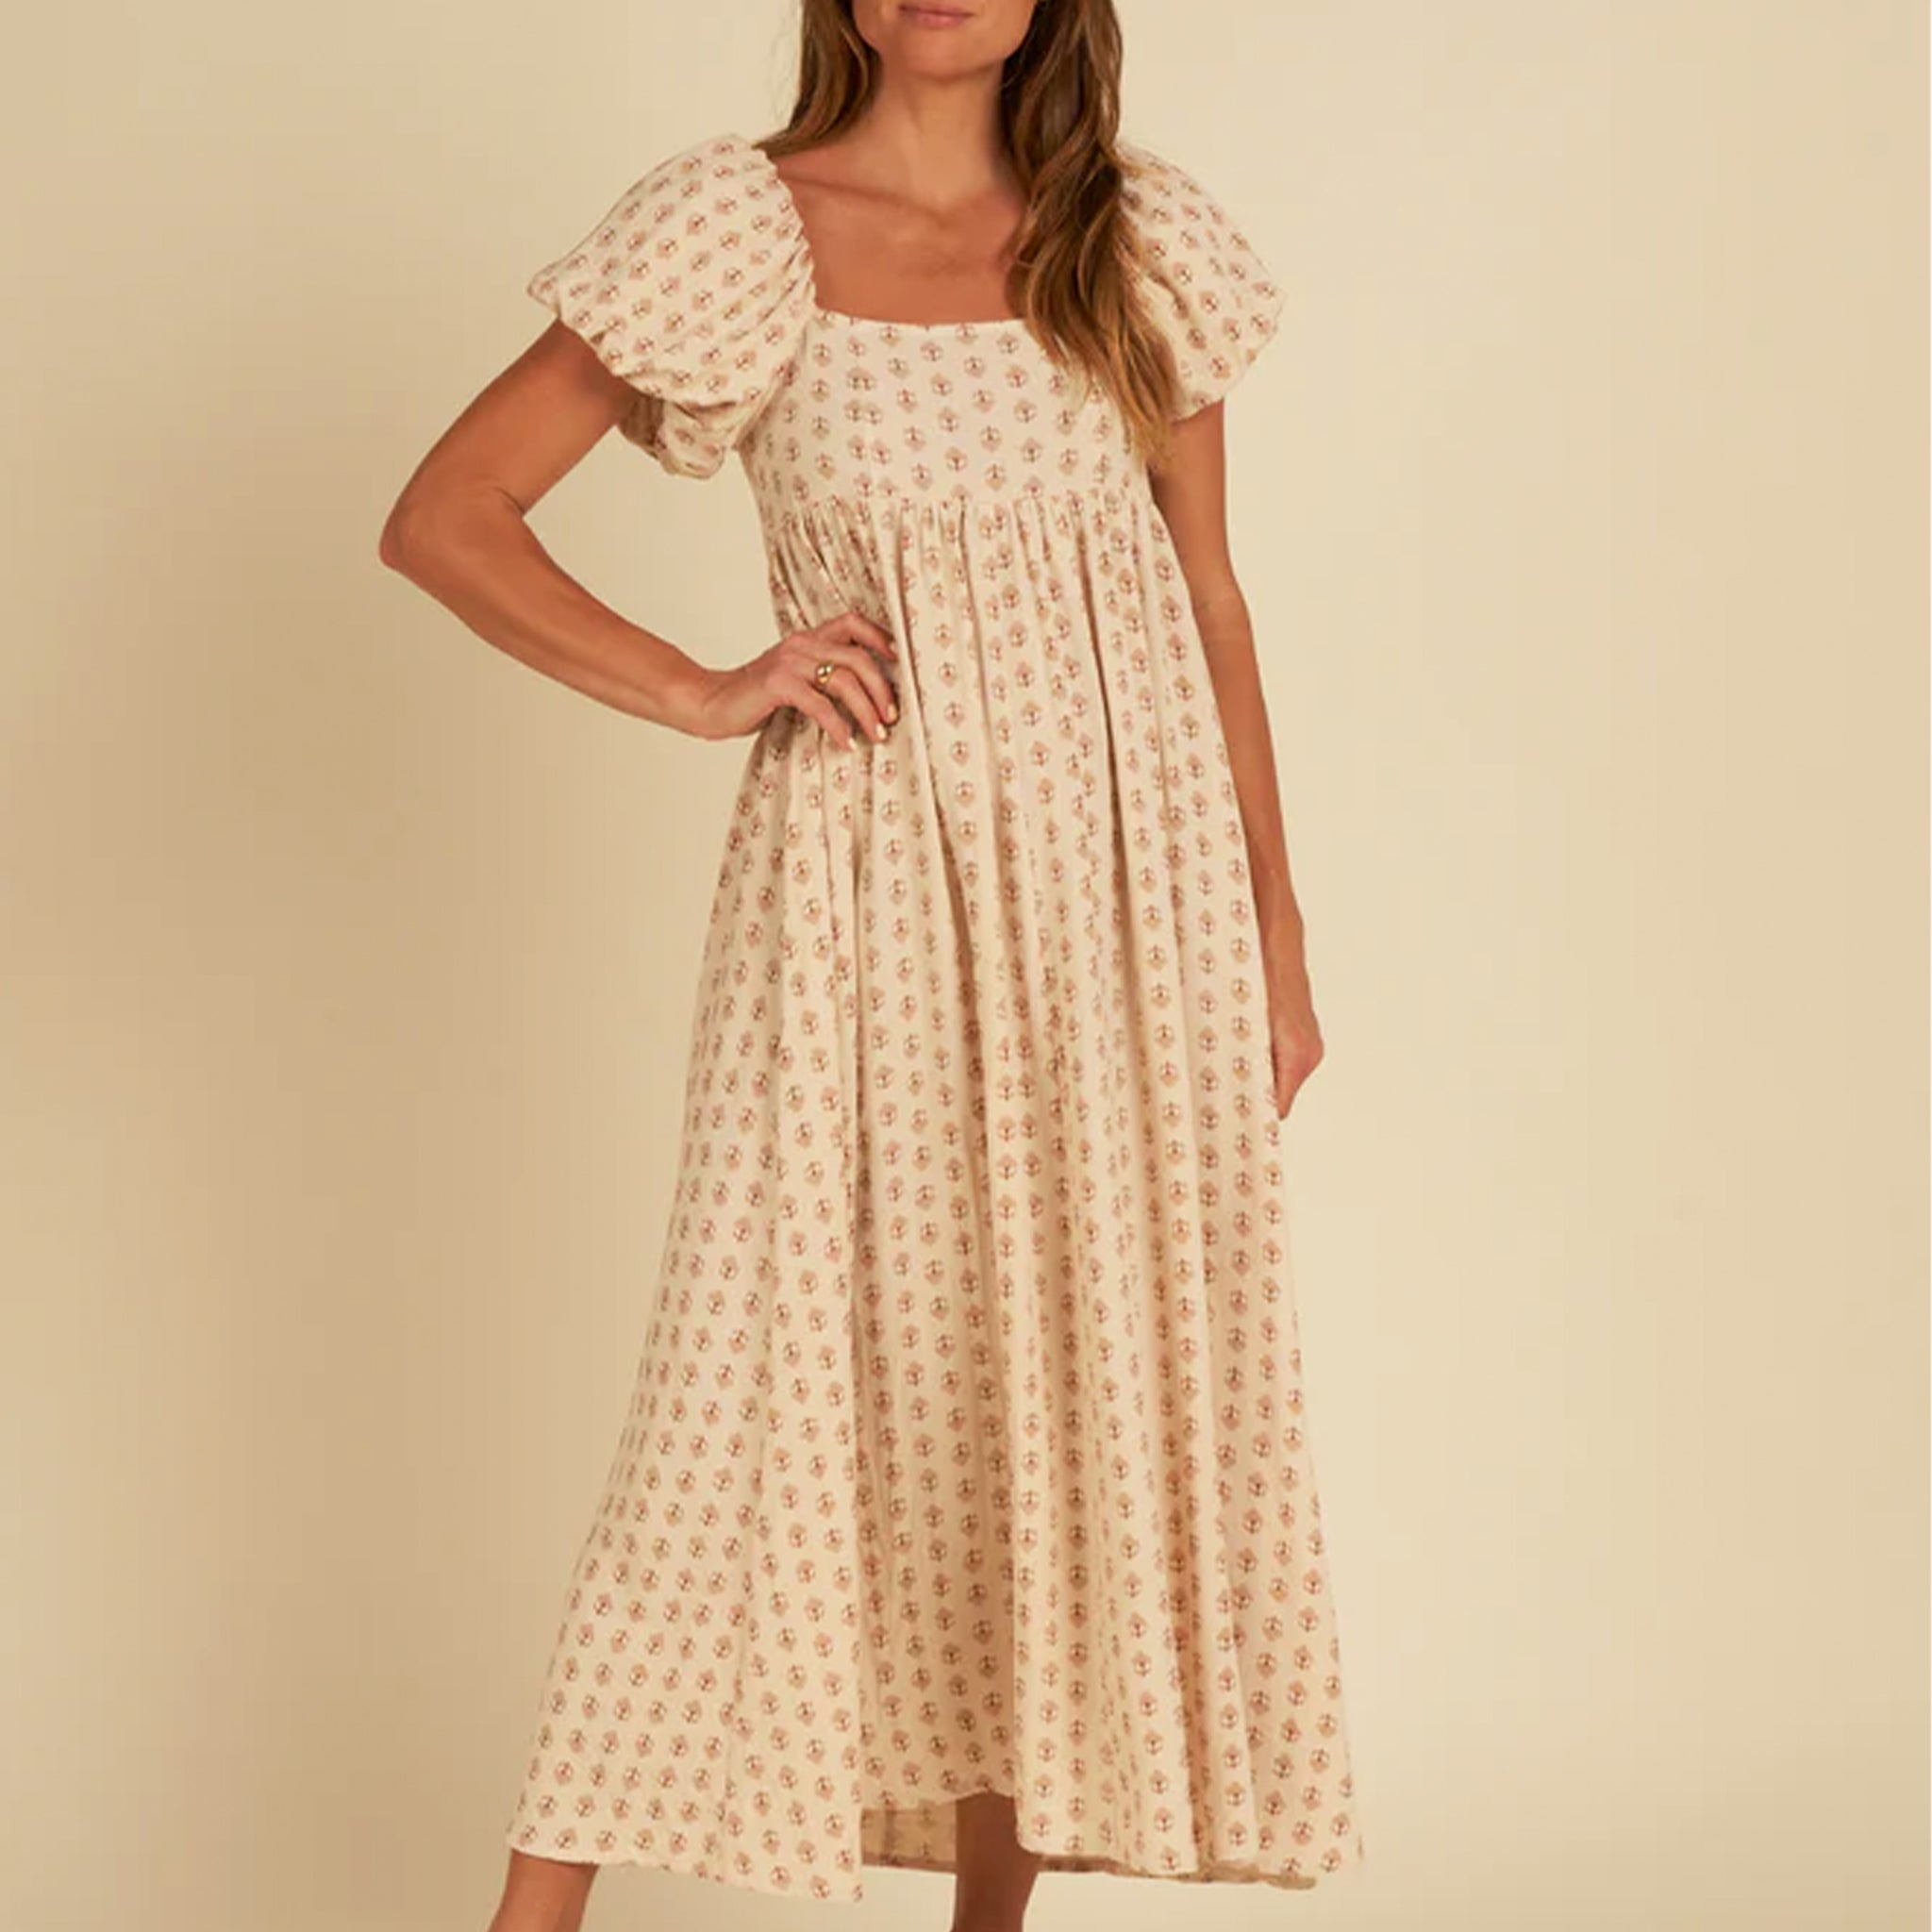 A neutral colored vintage floral print maxi dress with a square neckline and puffy short sleeves. 